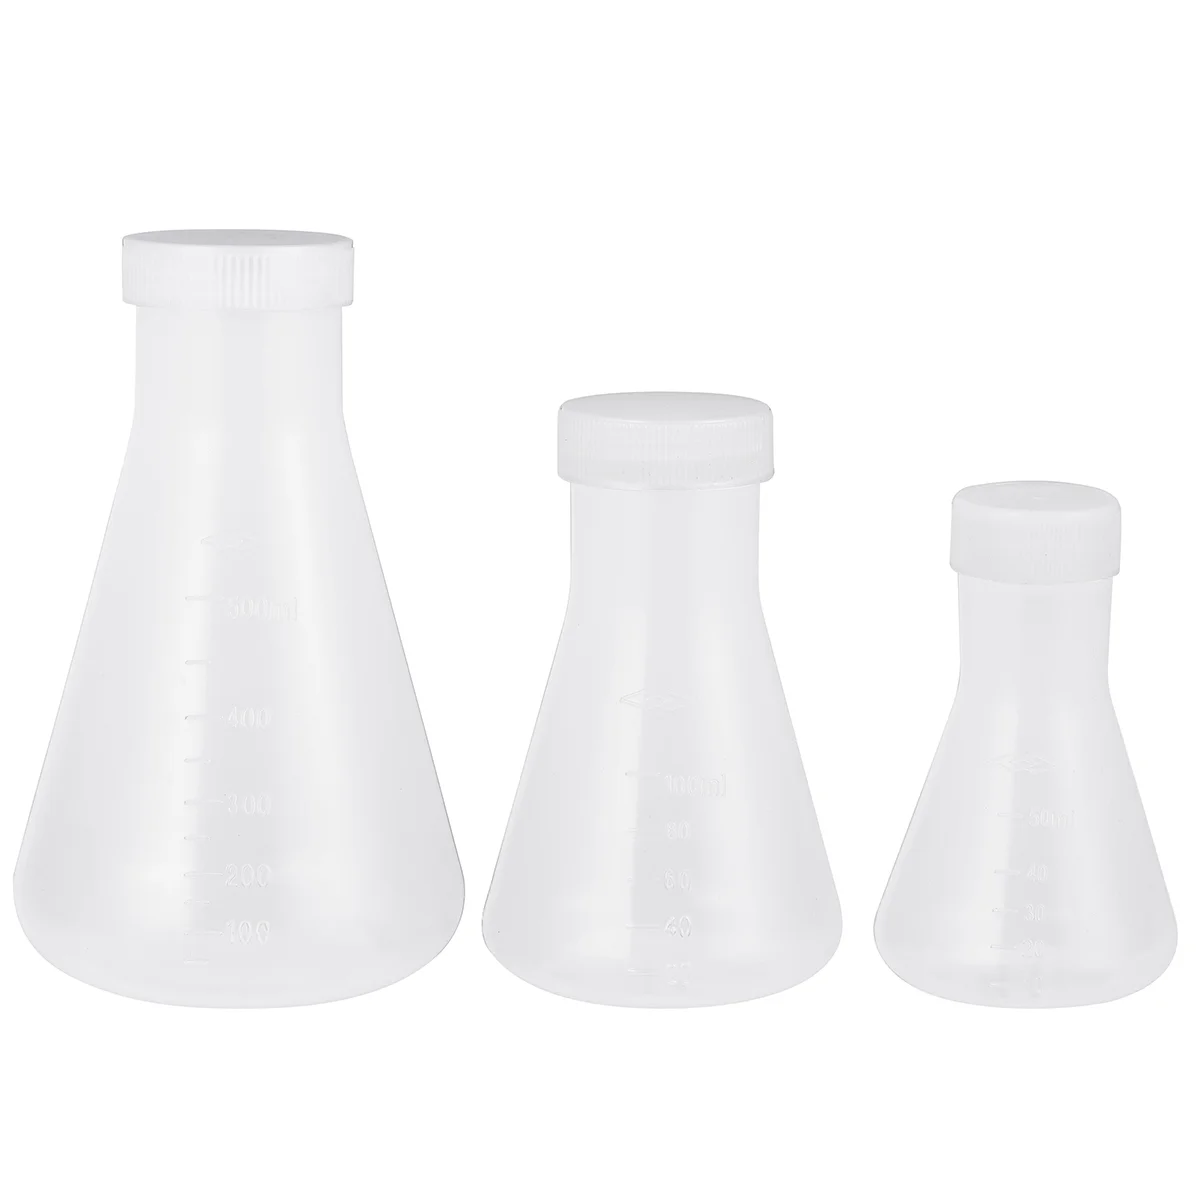 

3Pcs Plastic Test Tubes Conical Flask with Screw for Laboratory Students Experiment Chemistry White (50ml+100ml+500ml)